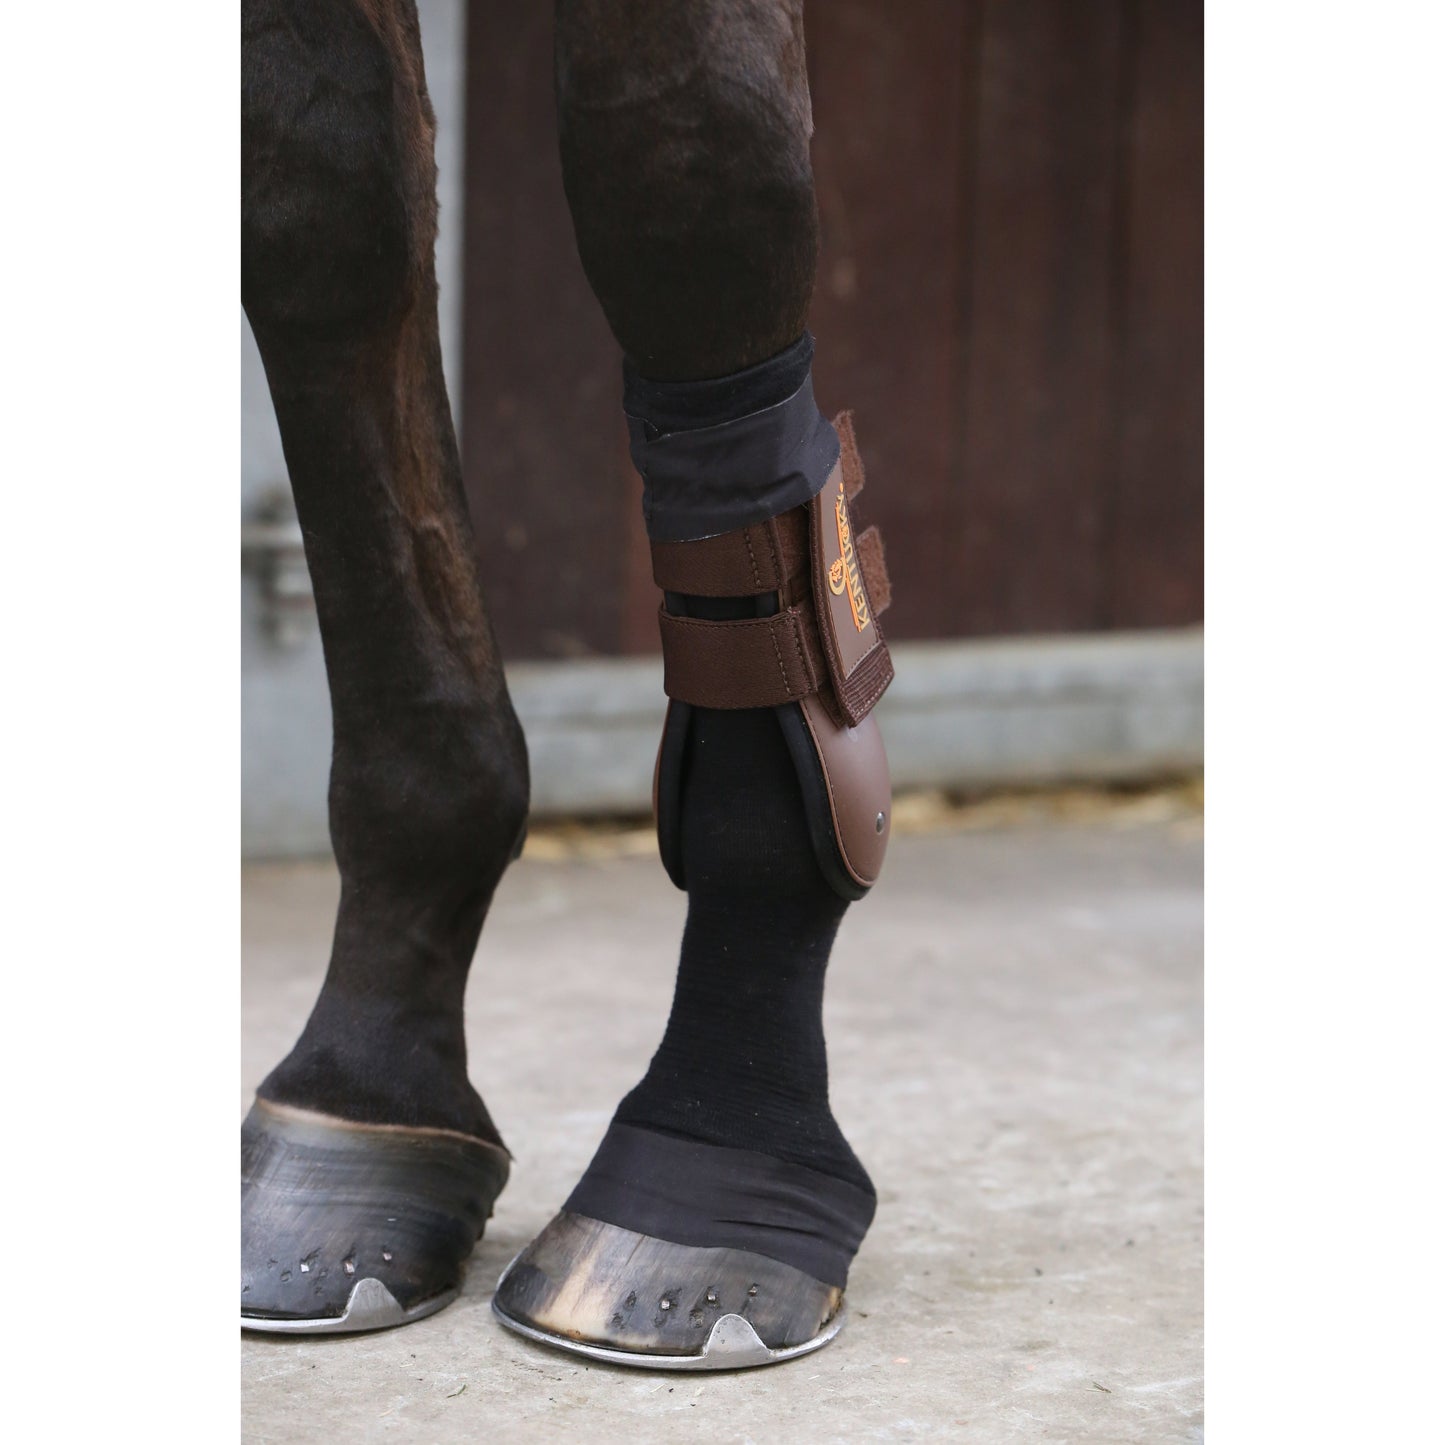 Kentucky Tendon Grip Sock-Trailrace Equestrian Outfitters-The Equestrian